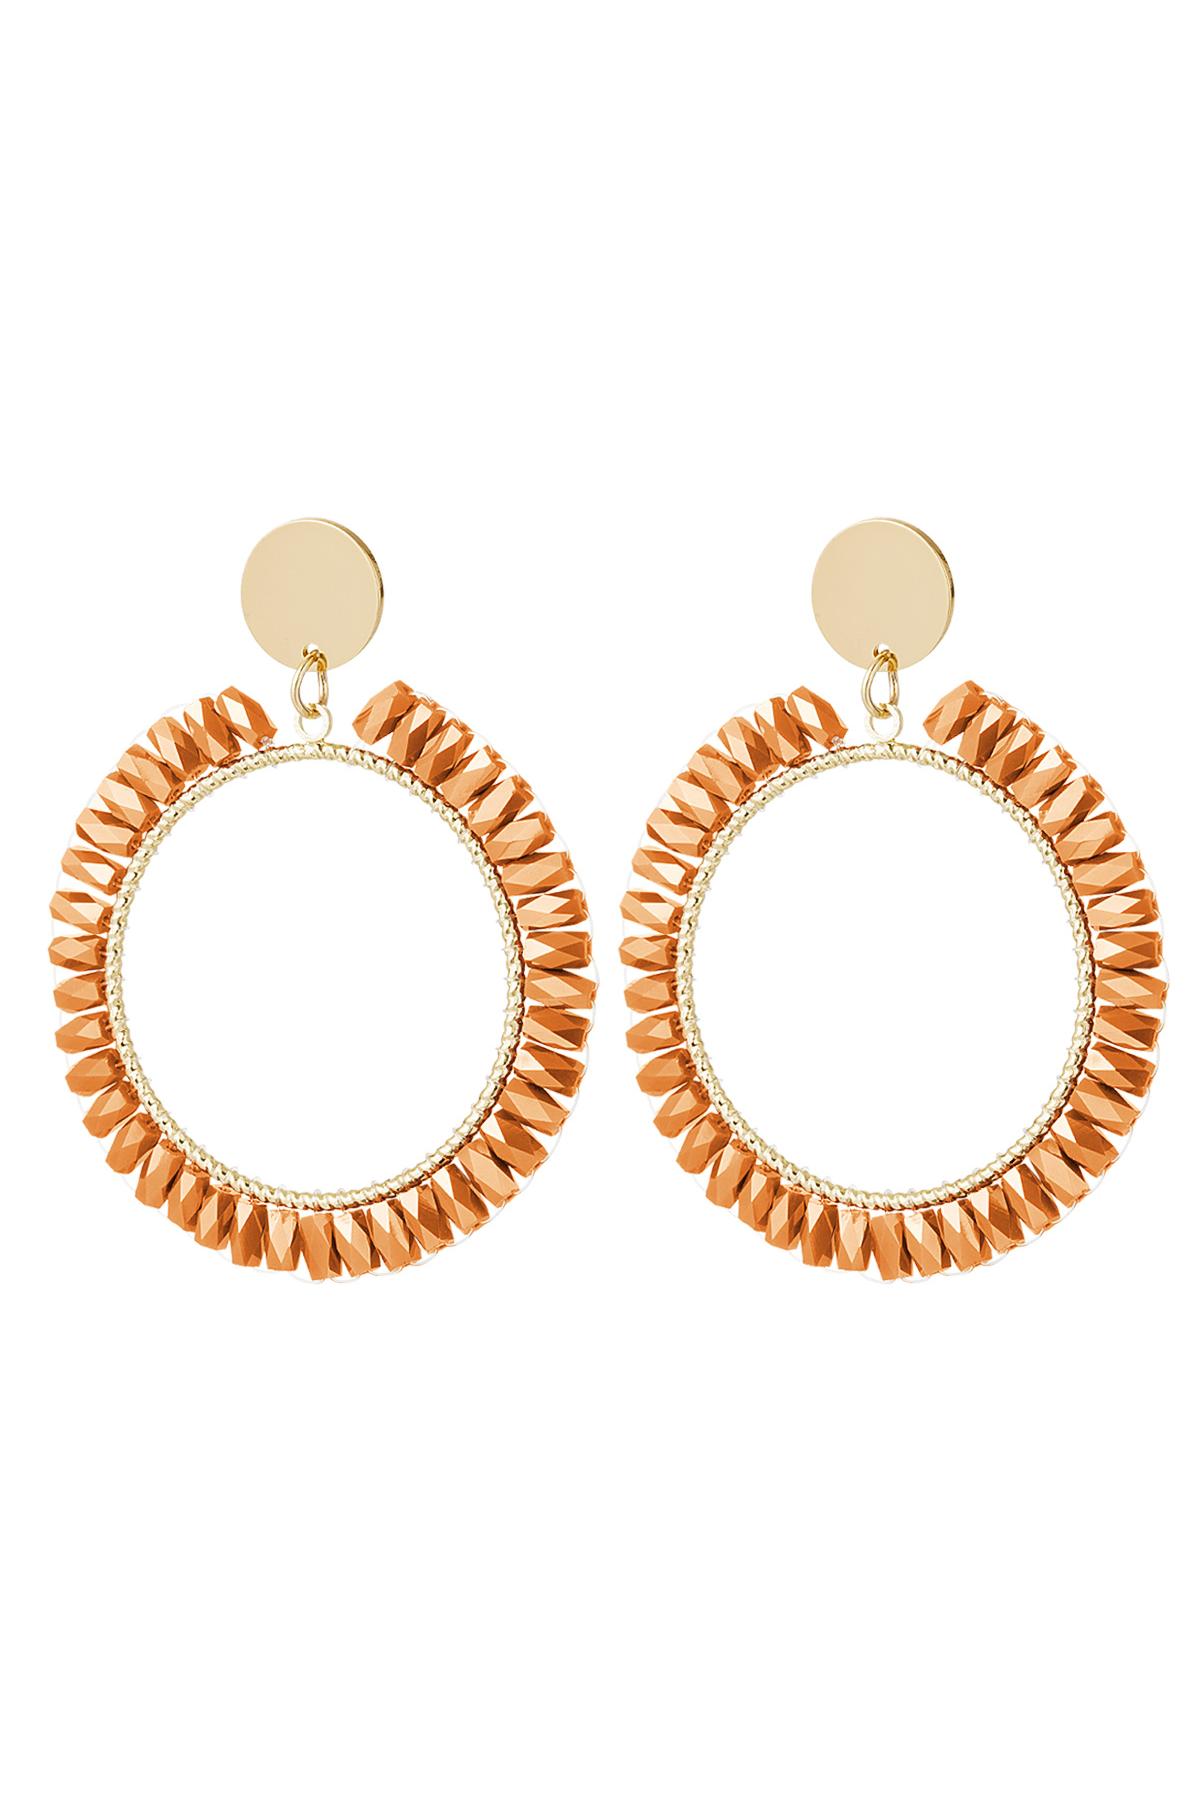 Earrings chic with crystal details Orange & Gold Copper h5 